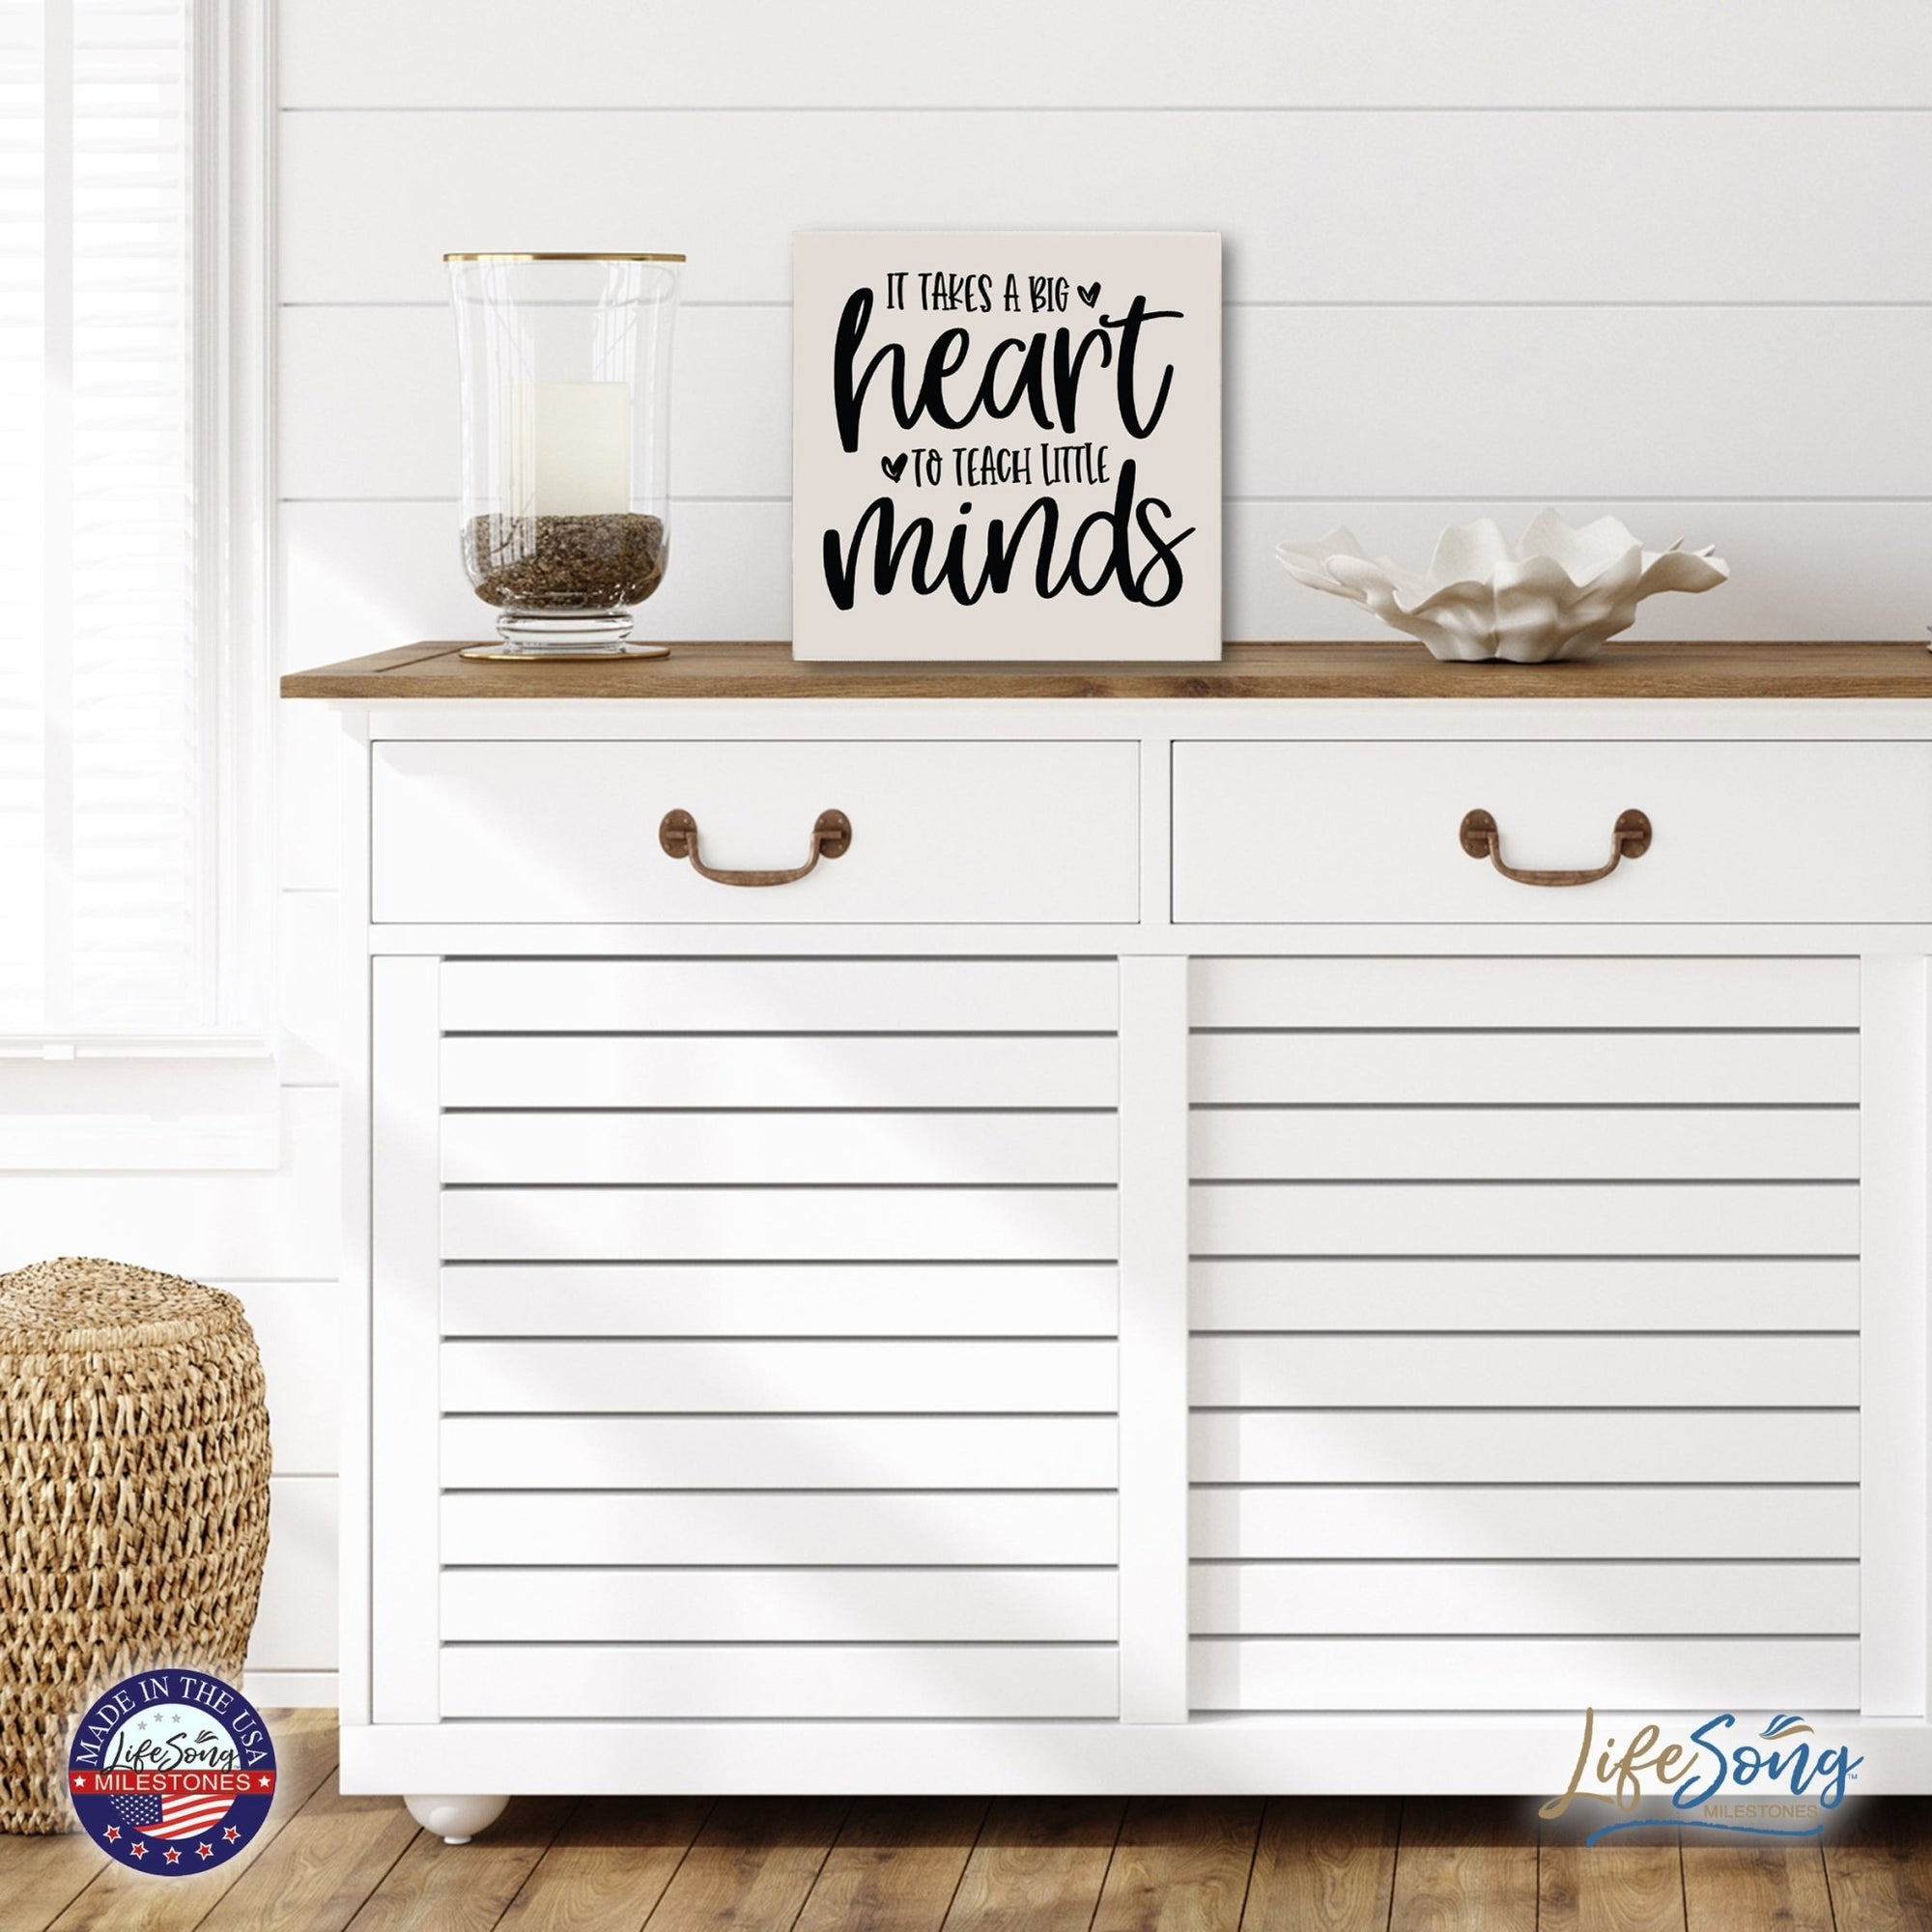 Modern Inspirational Shadow Box for Everyday Home Decorations For Mothers 6x6 - It Takes A Big Heart - LifeSong Milestones